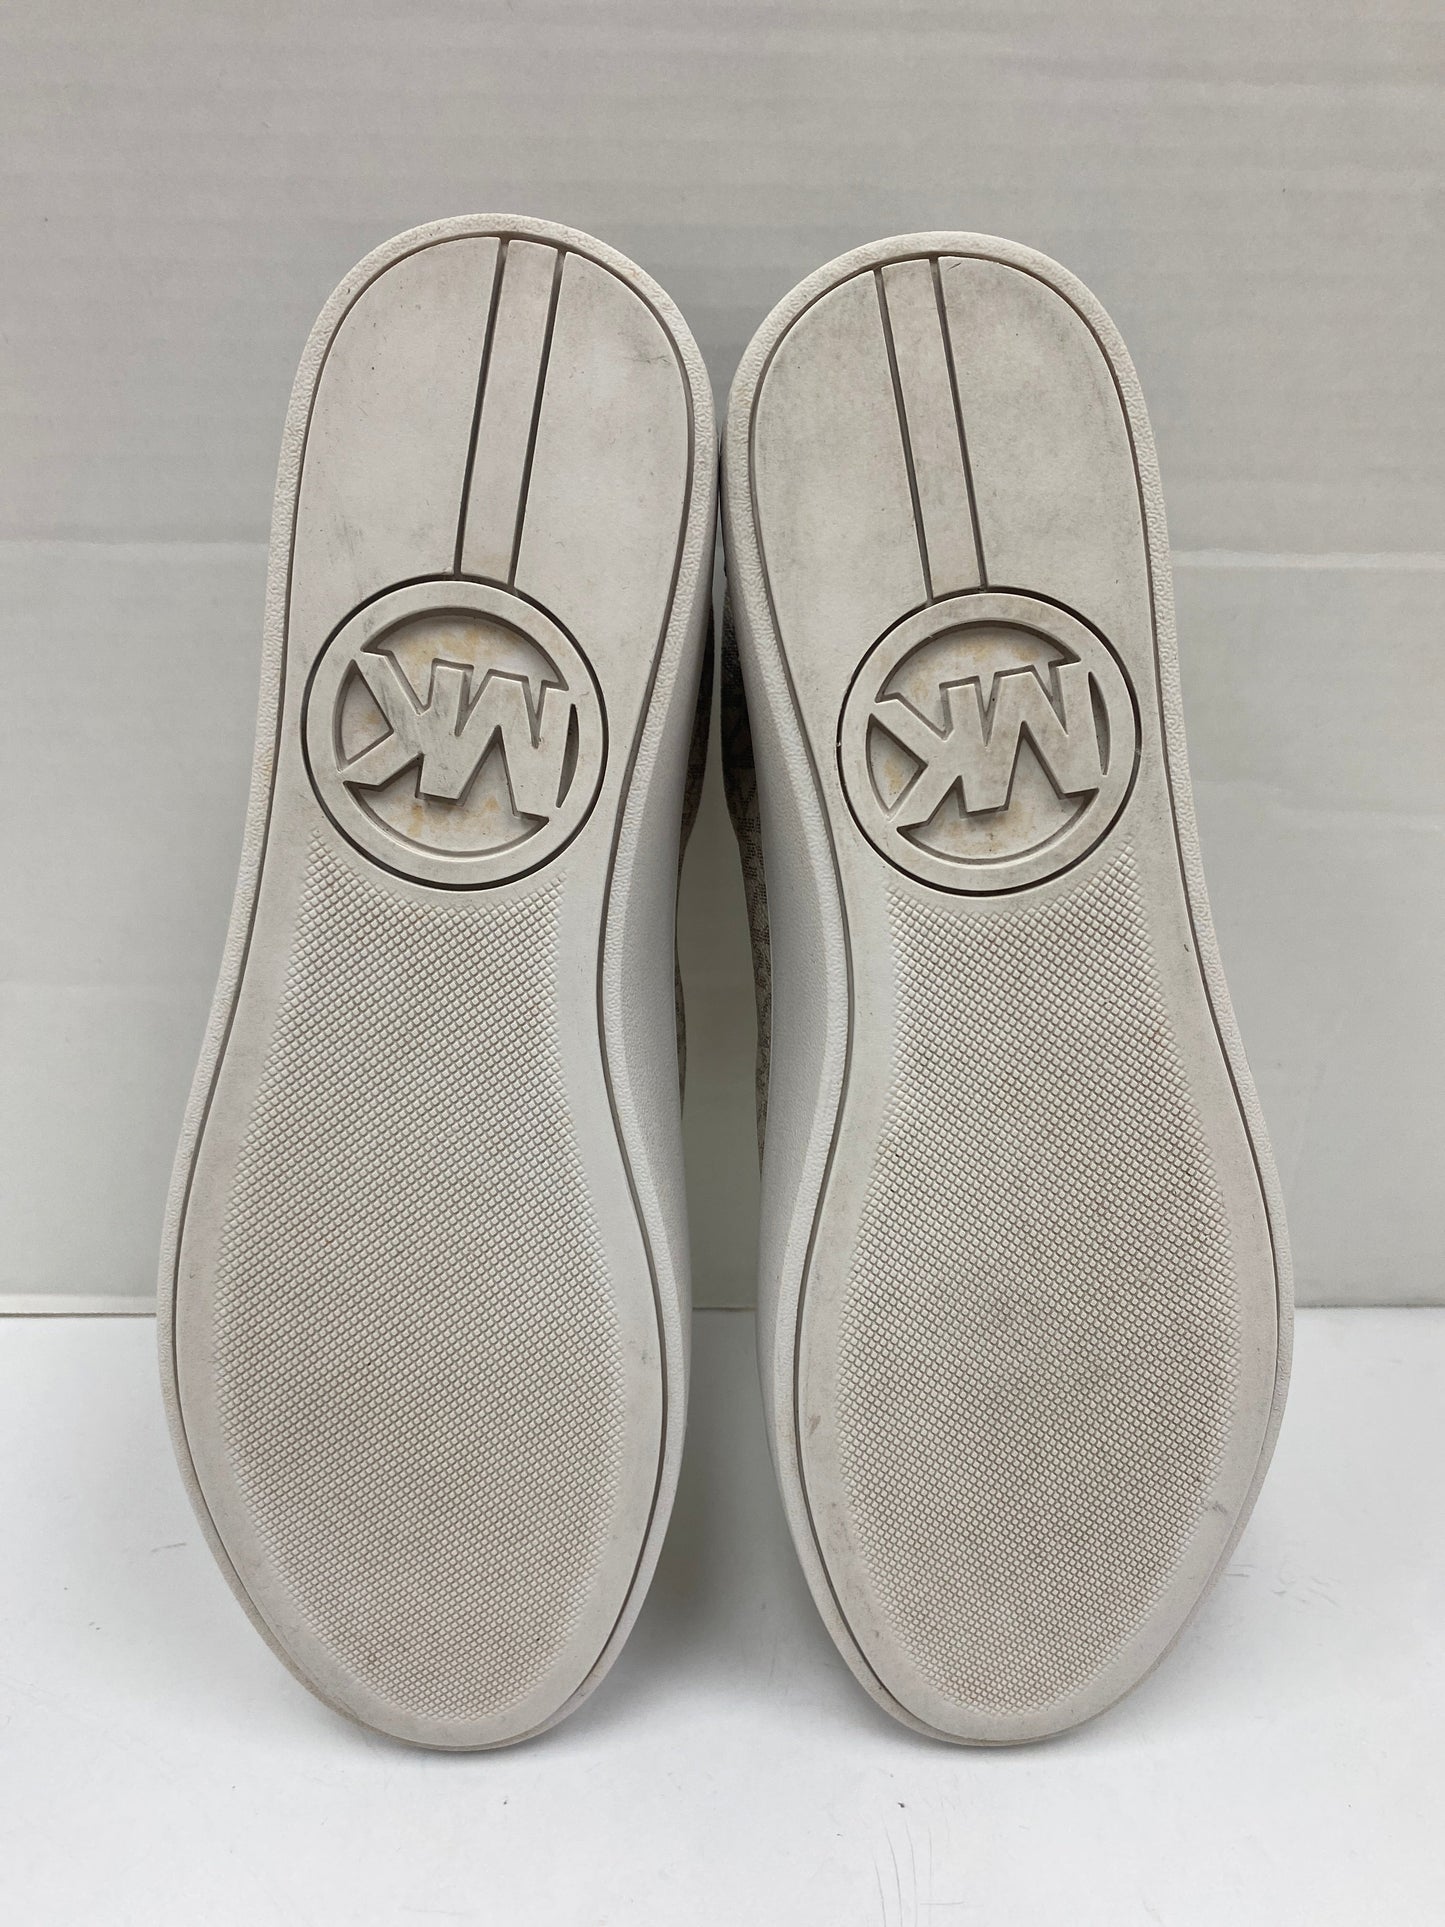 Shoes Sneakers By Michael By Michael Kors  Size: 11